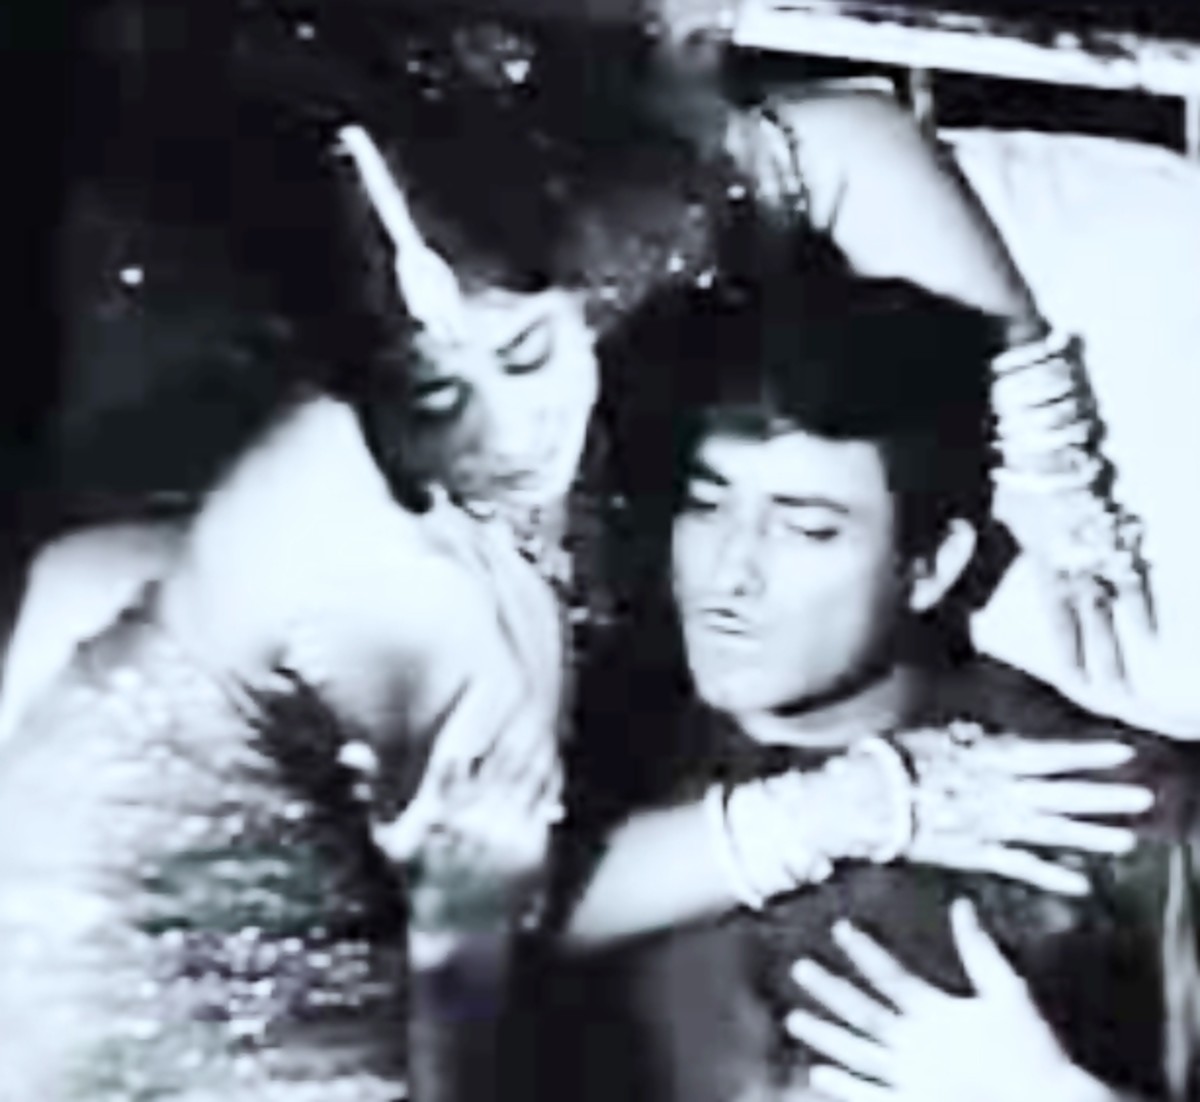  Raj Kumar and Meena Kumari made one of the most convincing on screen pairs of Bollywood